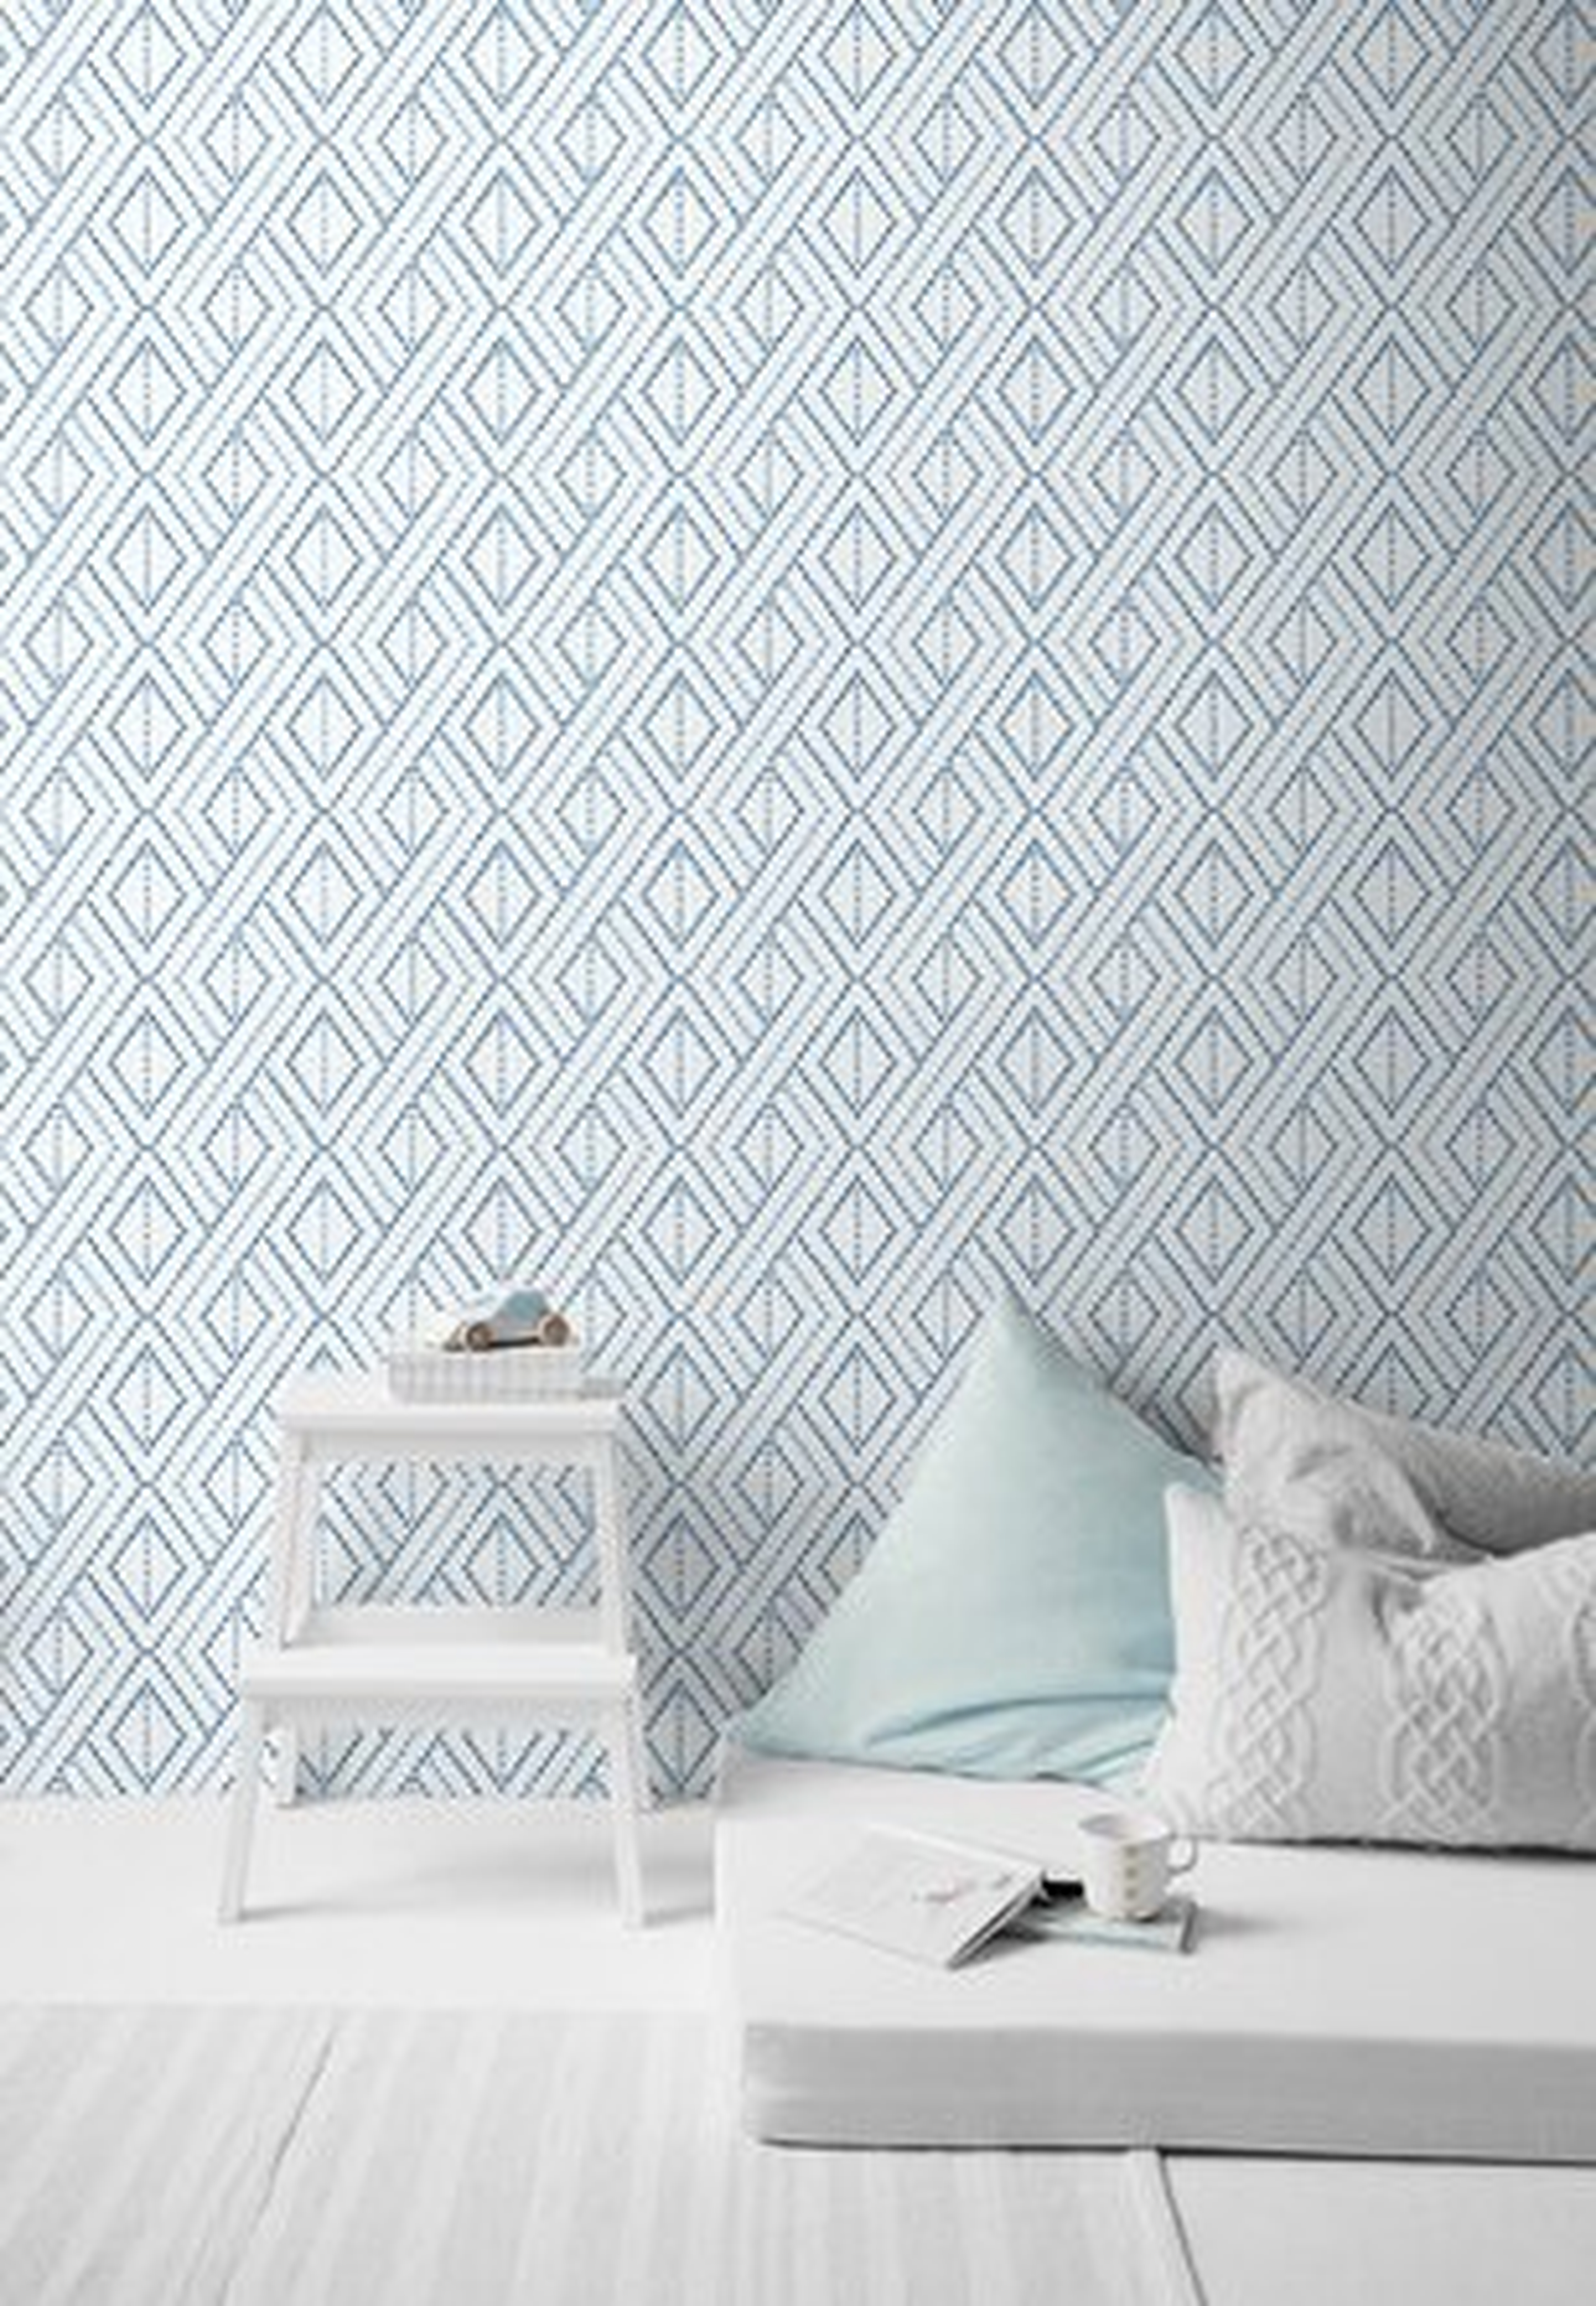 Lillian August Luxe Haven Boho Grid  9' L x 20.5"""" W Peel and Stick Wallpaper Roll - Perigold